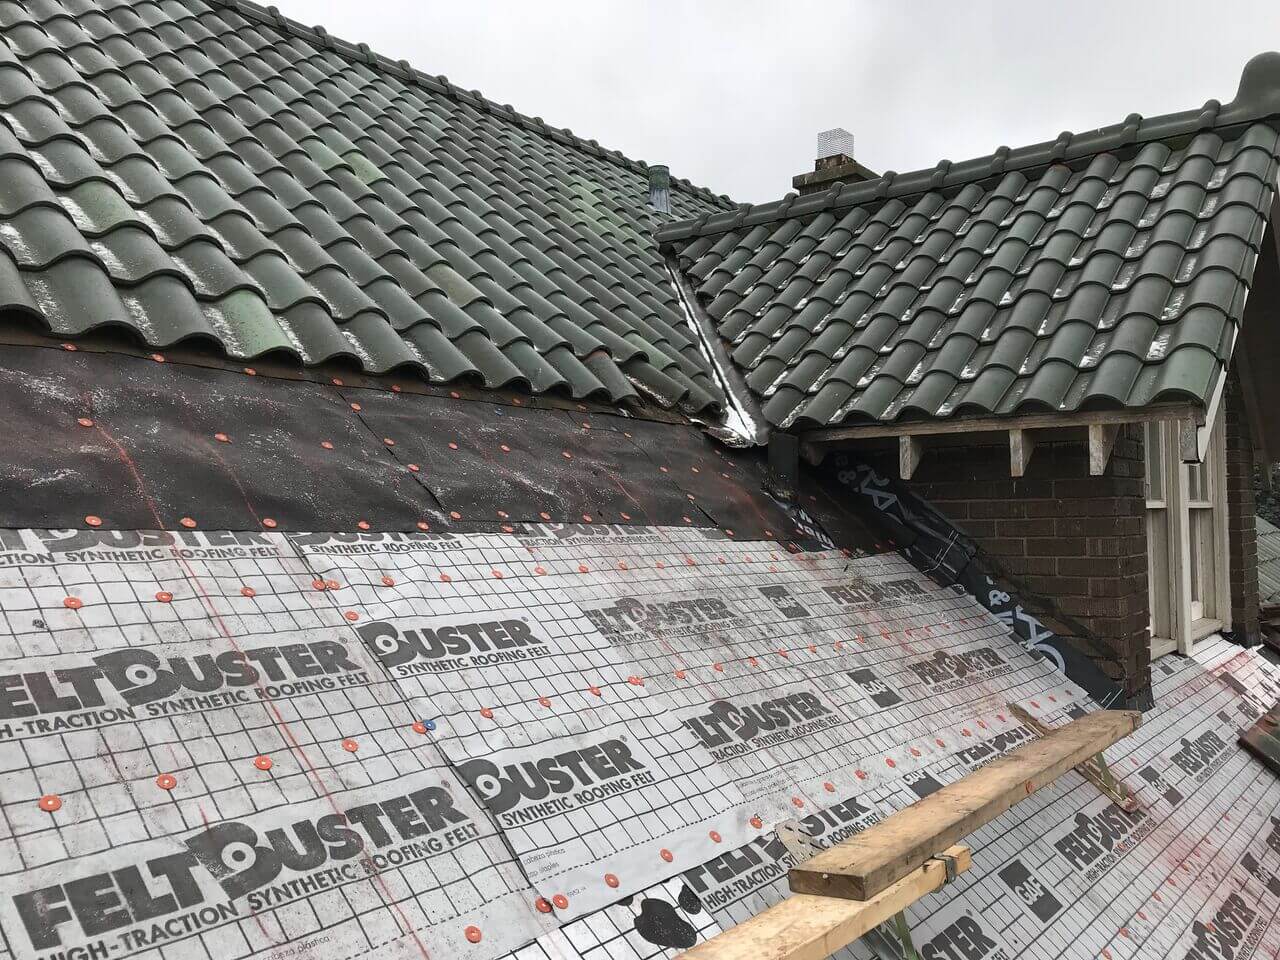 Spanish Tile Roof Repair ensuring replacements lay correctly